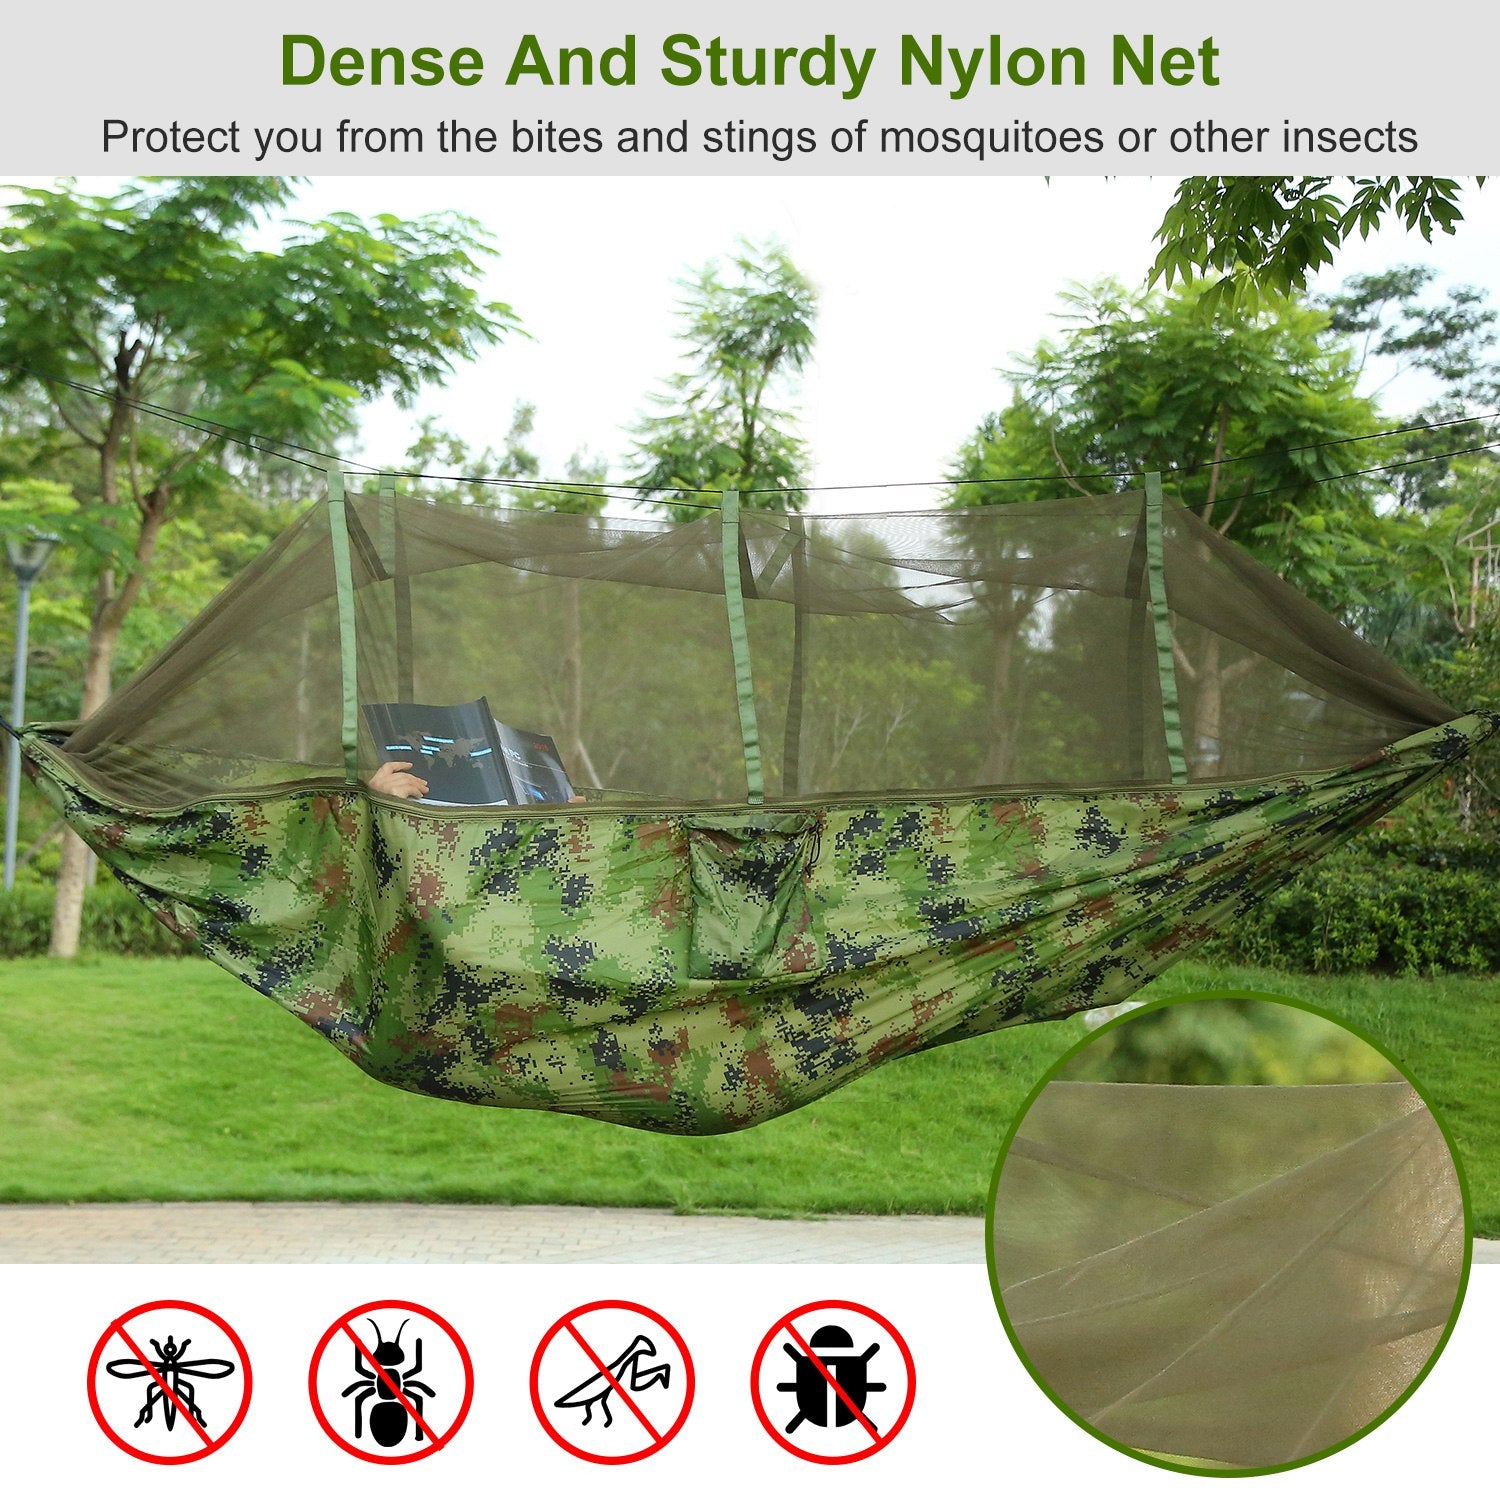 iMountek Camping Hammock with Mosquito Net Portable Automatic Quick Open Hammocks for Indoor Outdoor Hiking Camping Backpacking Travel Backyard Beach